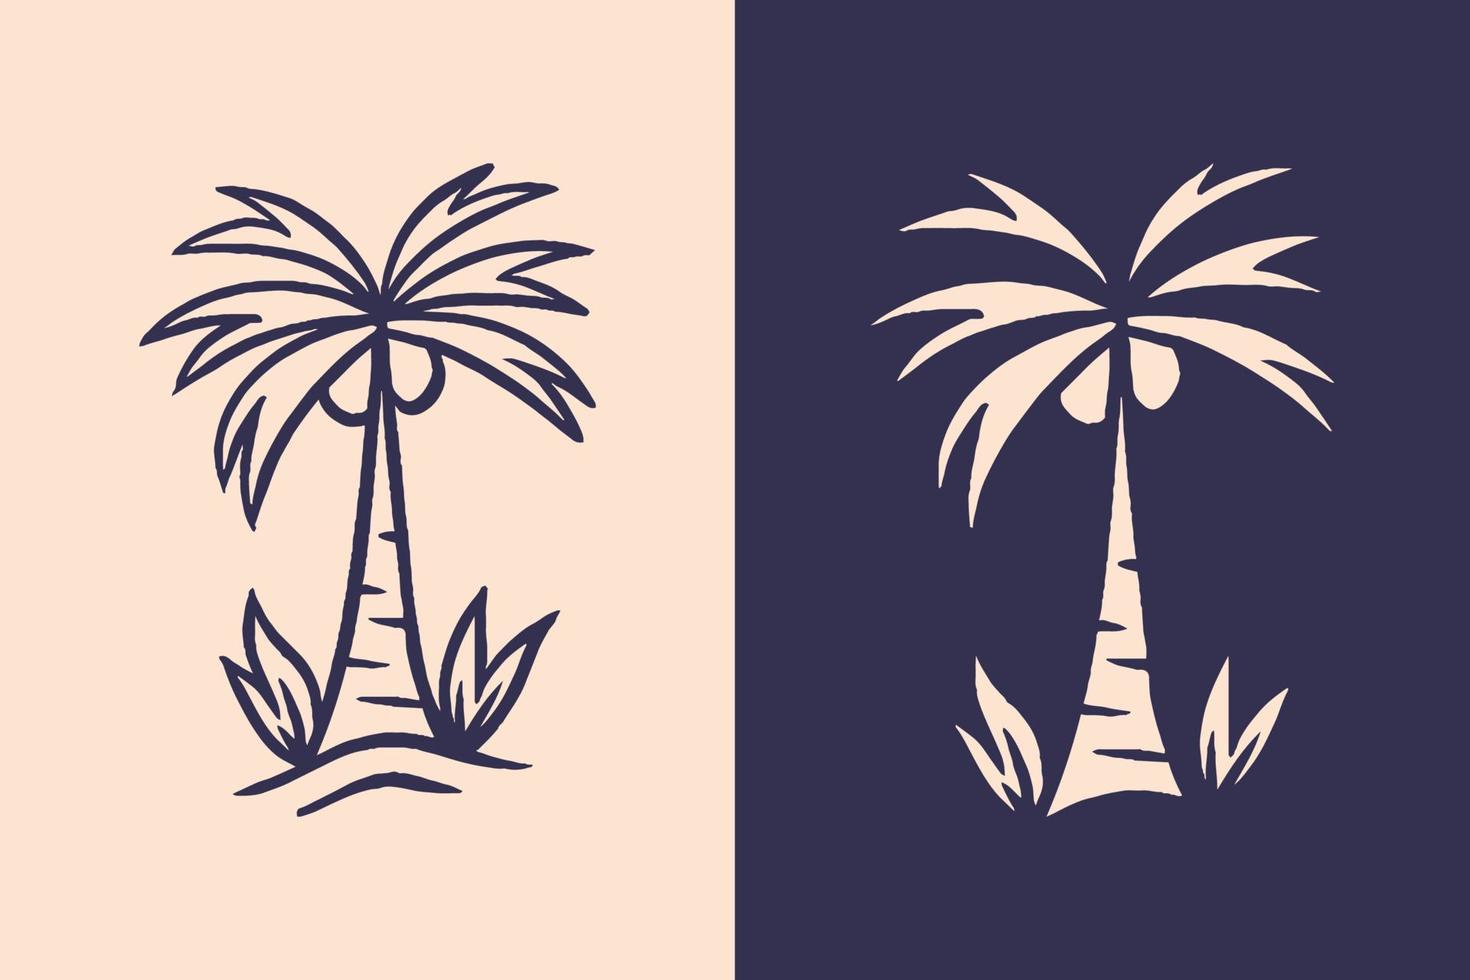 Tropical Coconut Tree Illustration in Tropical Place with Retro Style vector